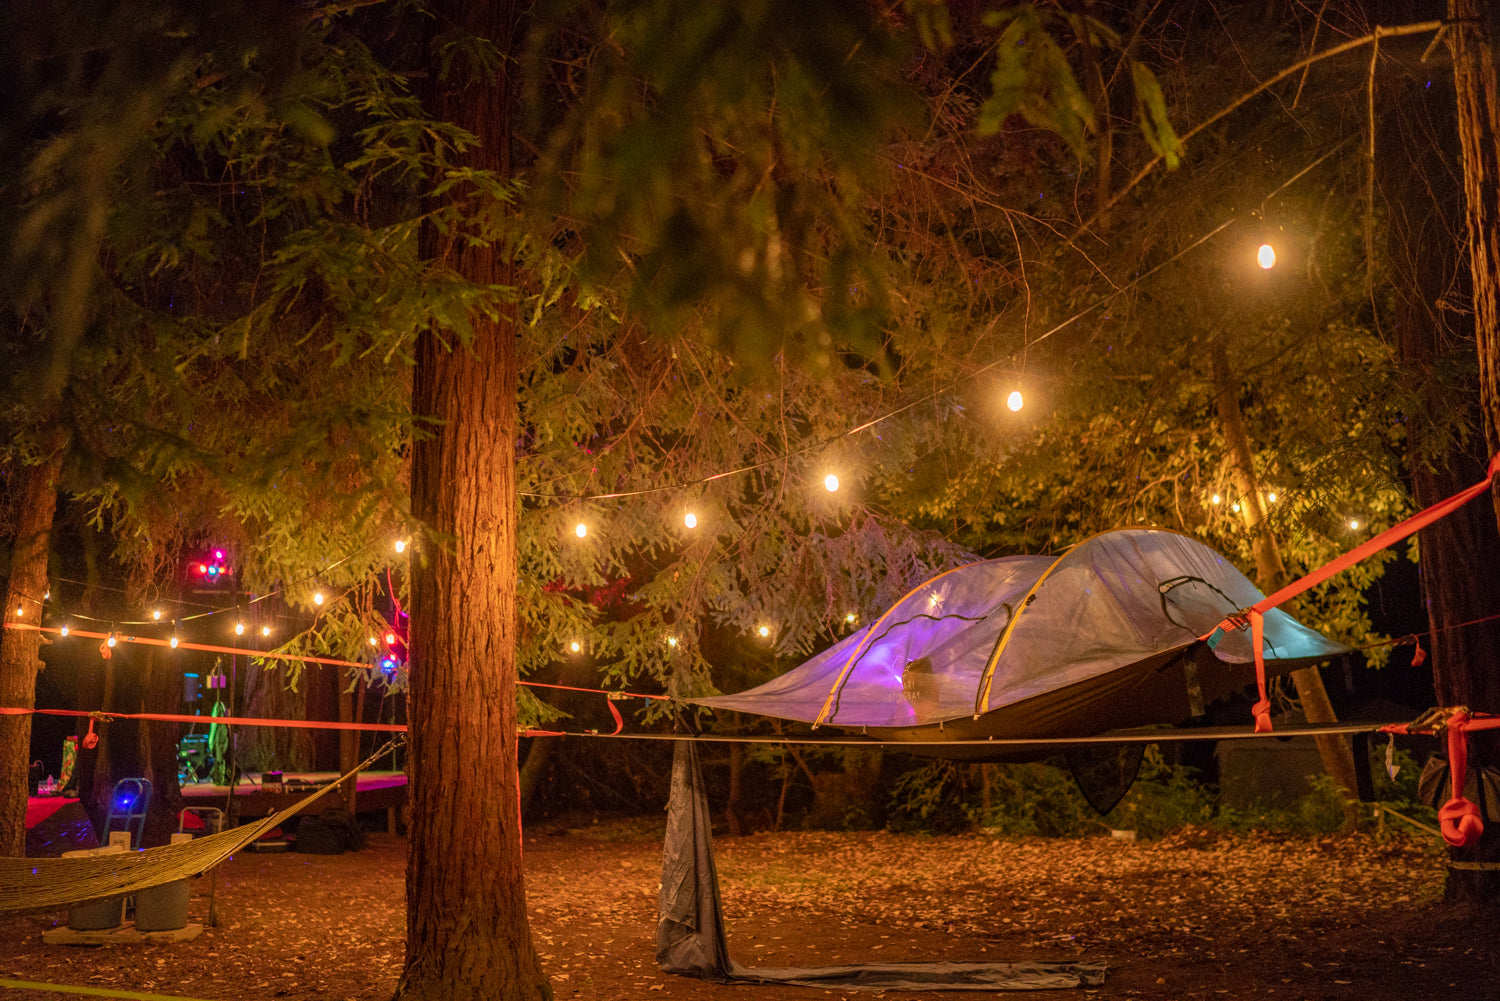 Join the global network of Tentsile Experience Camps in 2021